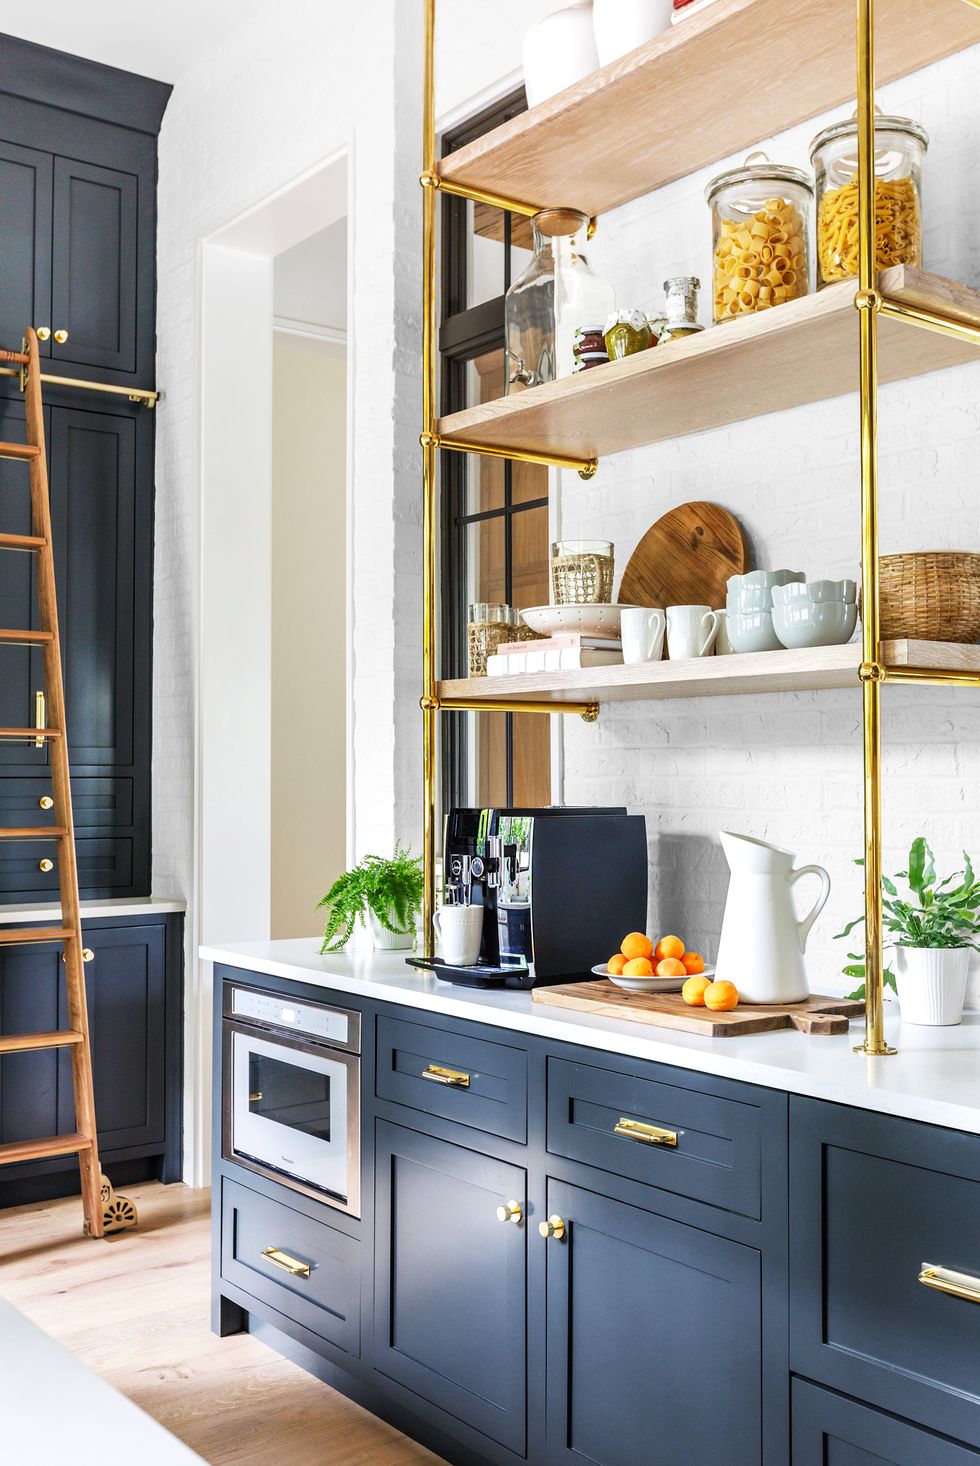 How to Hide Small Kitchen Appliances Without a Butler's Pantry